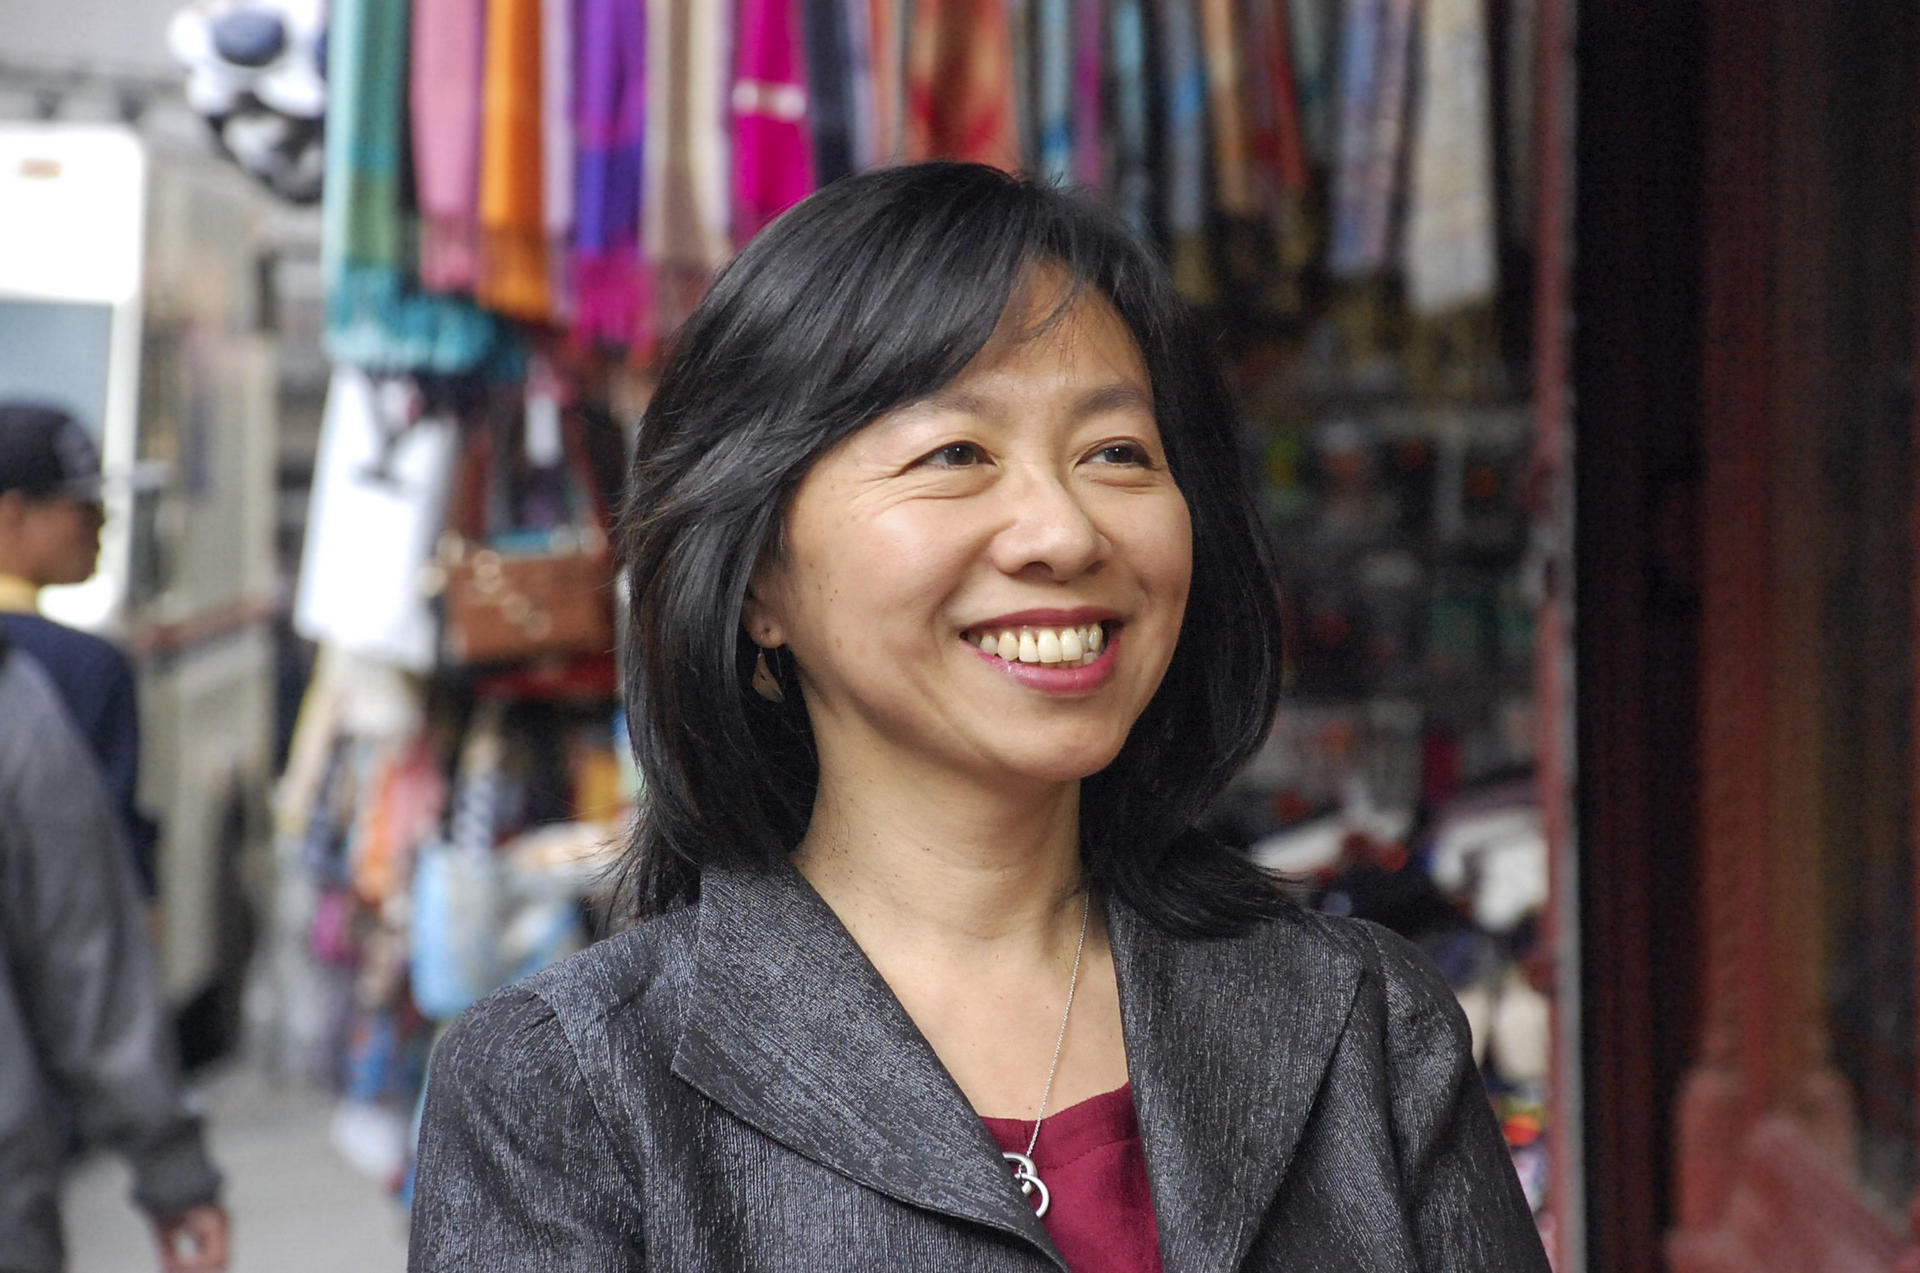 Bronx-born Amy Chin is keenly aware of the Exclusion Act's impact on her forebears. Photo: Xiaoqing Rong